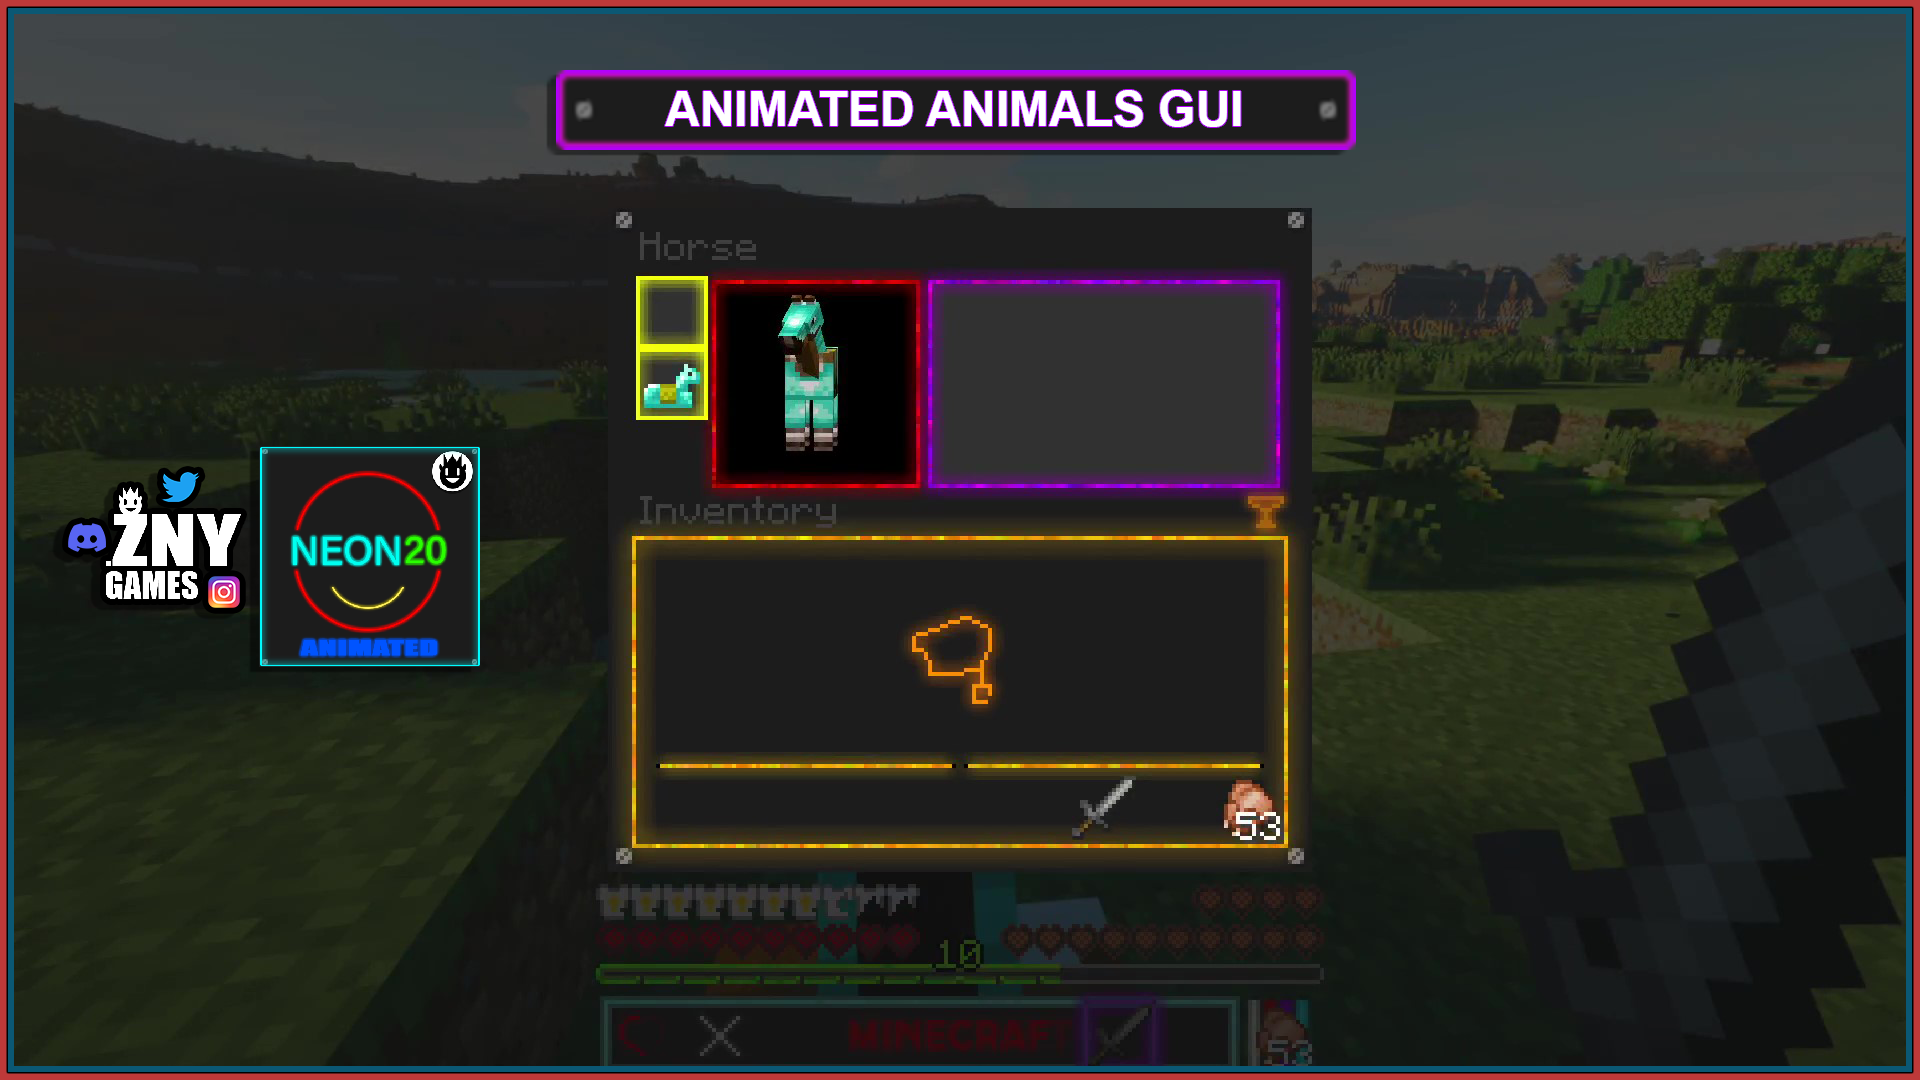 znygames gui texturepack neon20 animated for optifine - animals